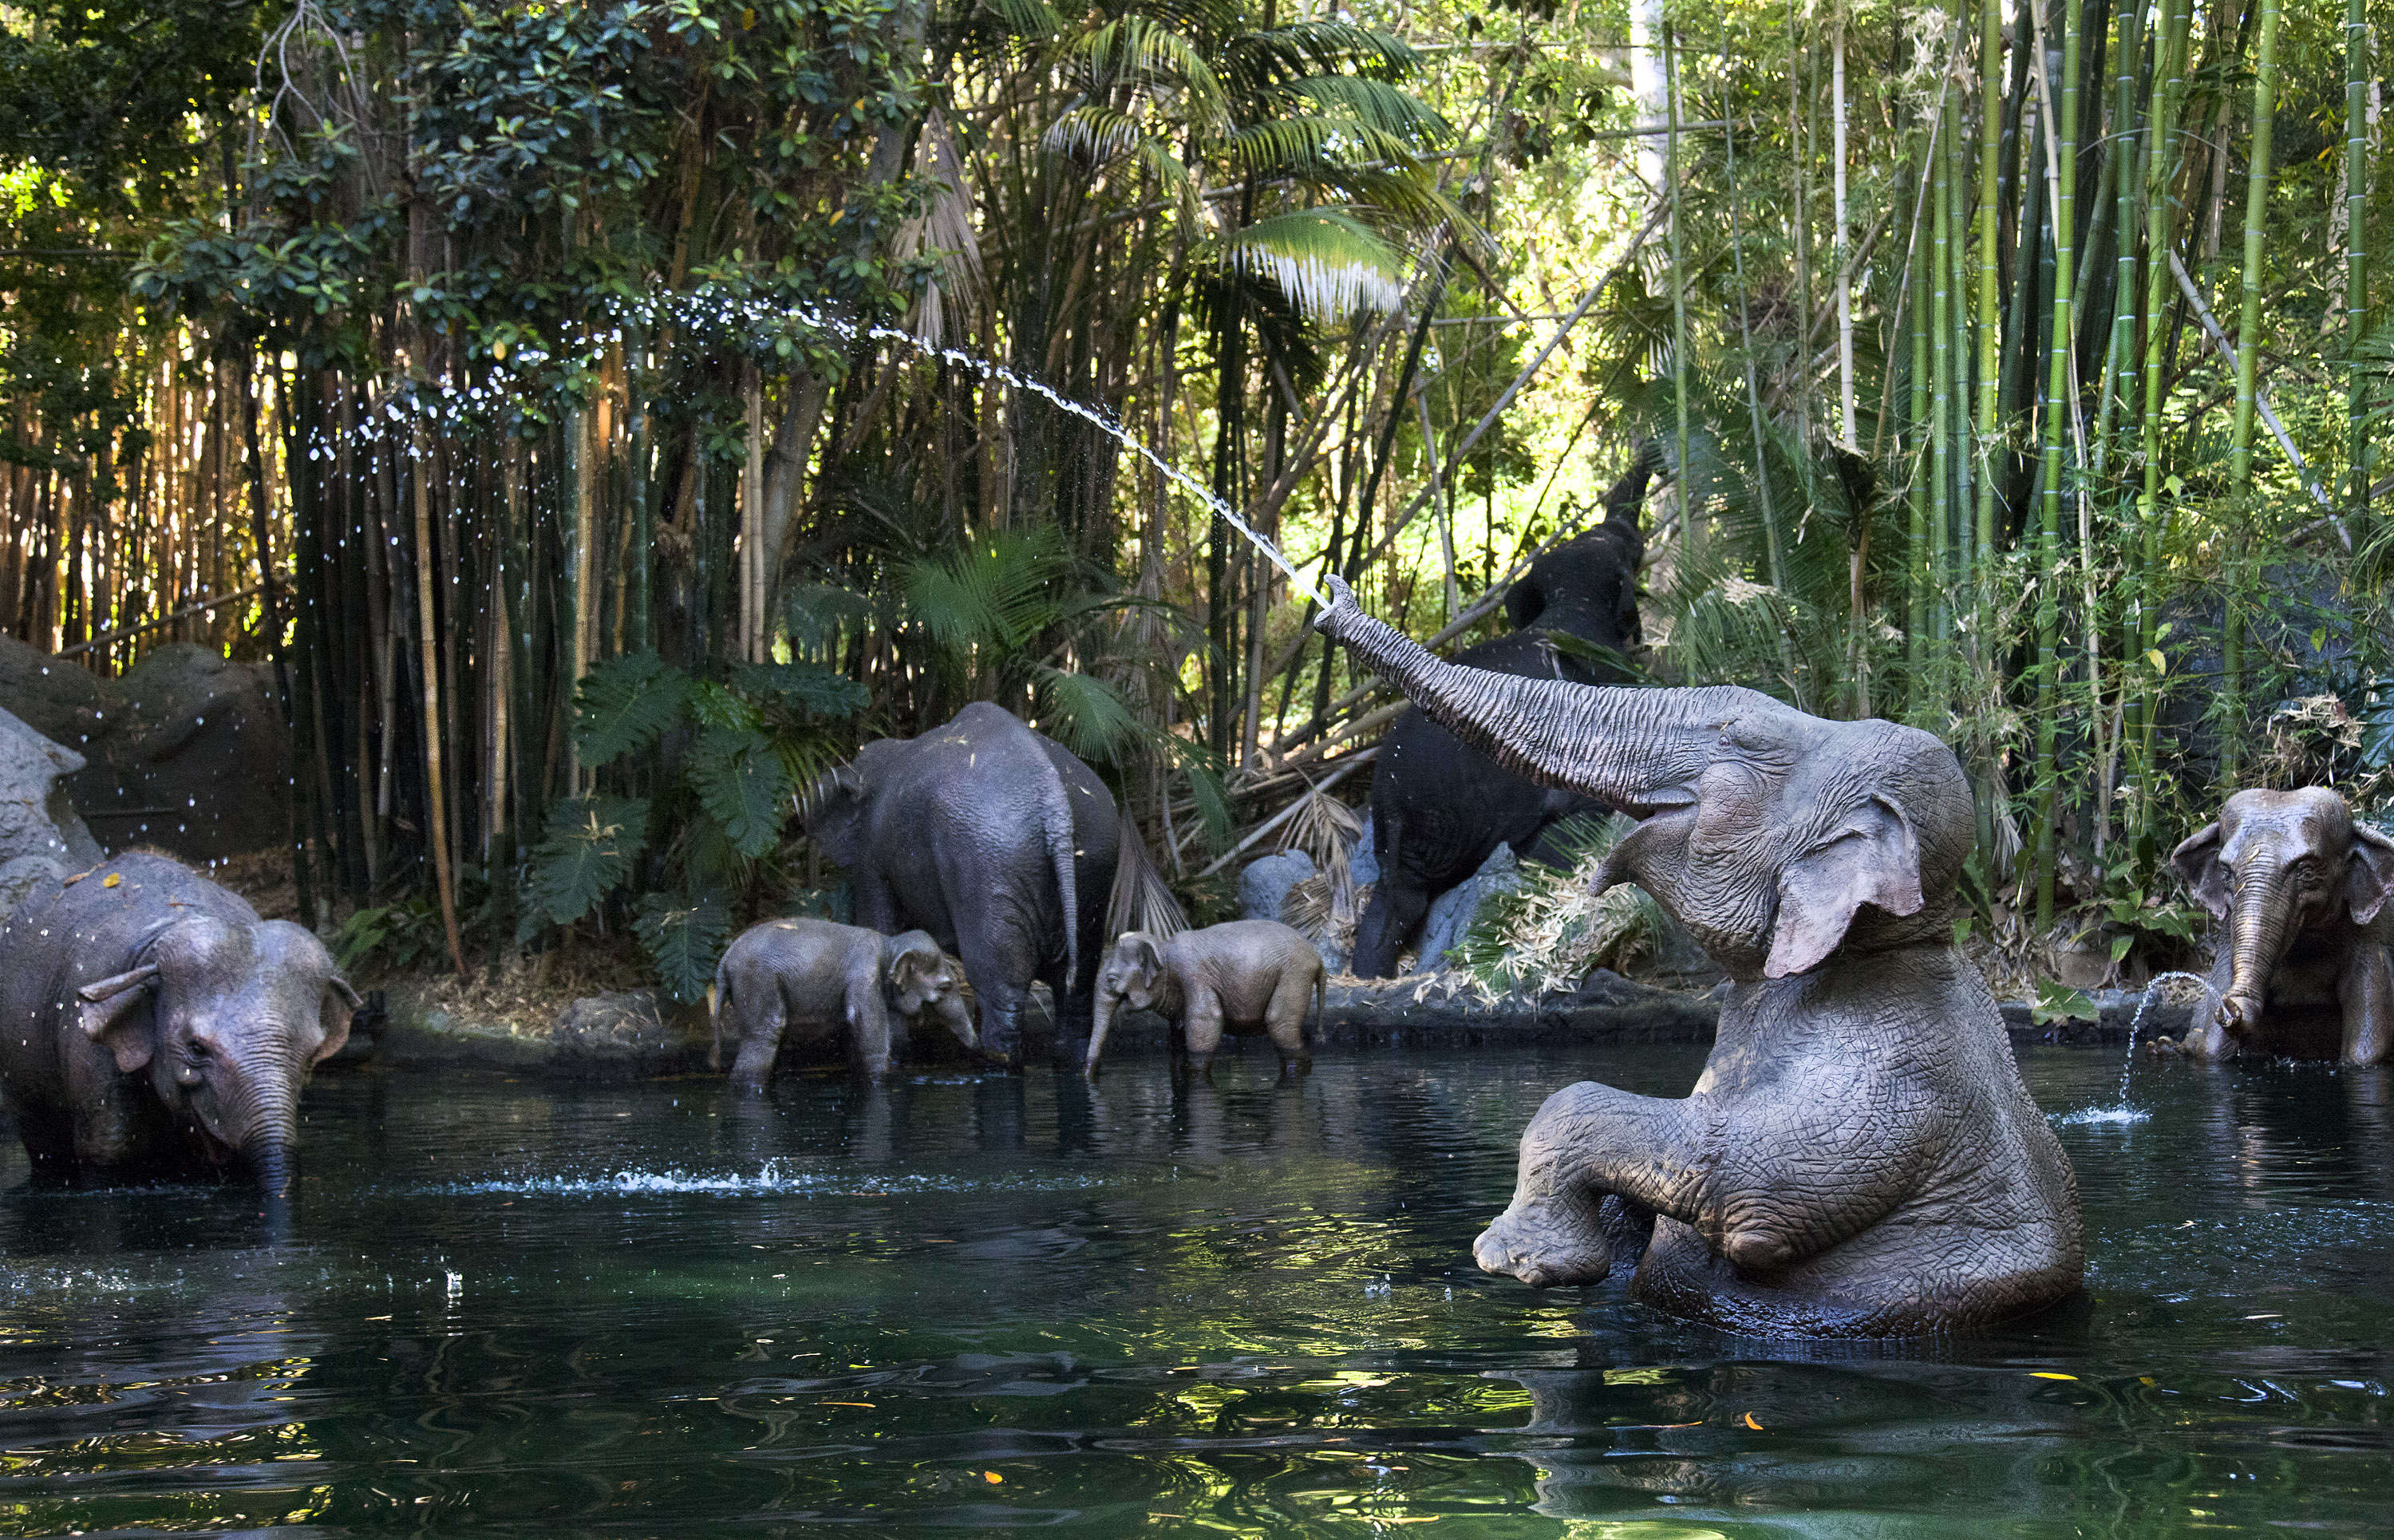 An elephant spouting water on Disney's Jungle Cruise